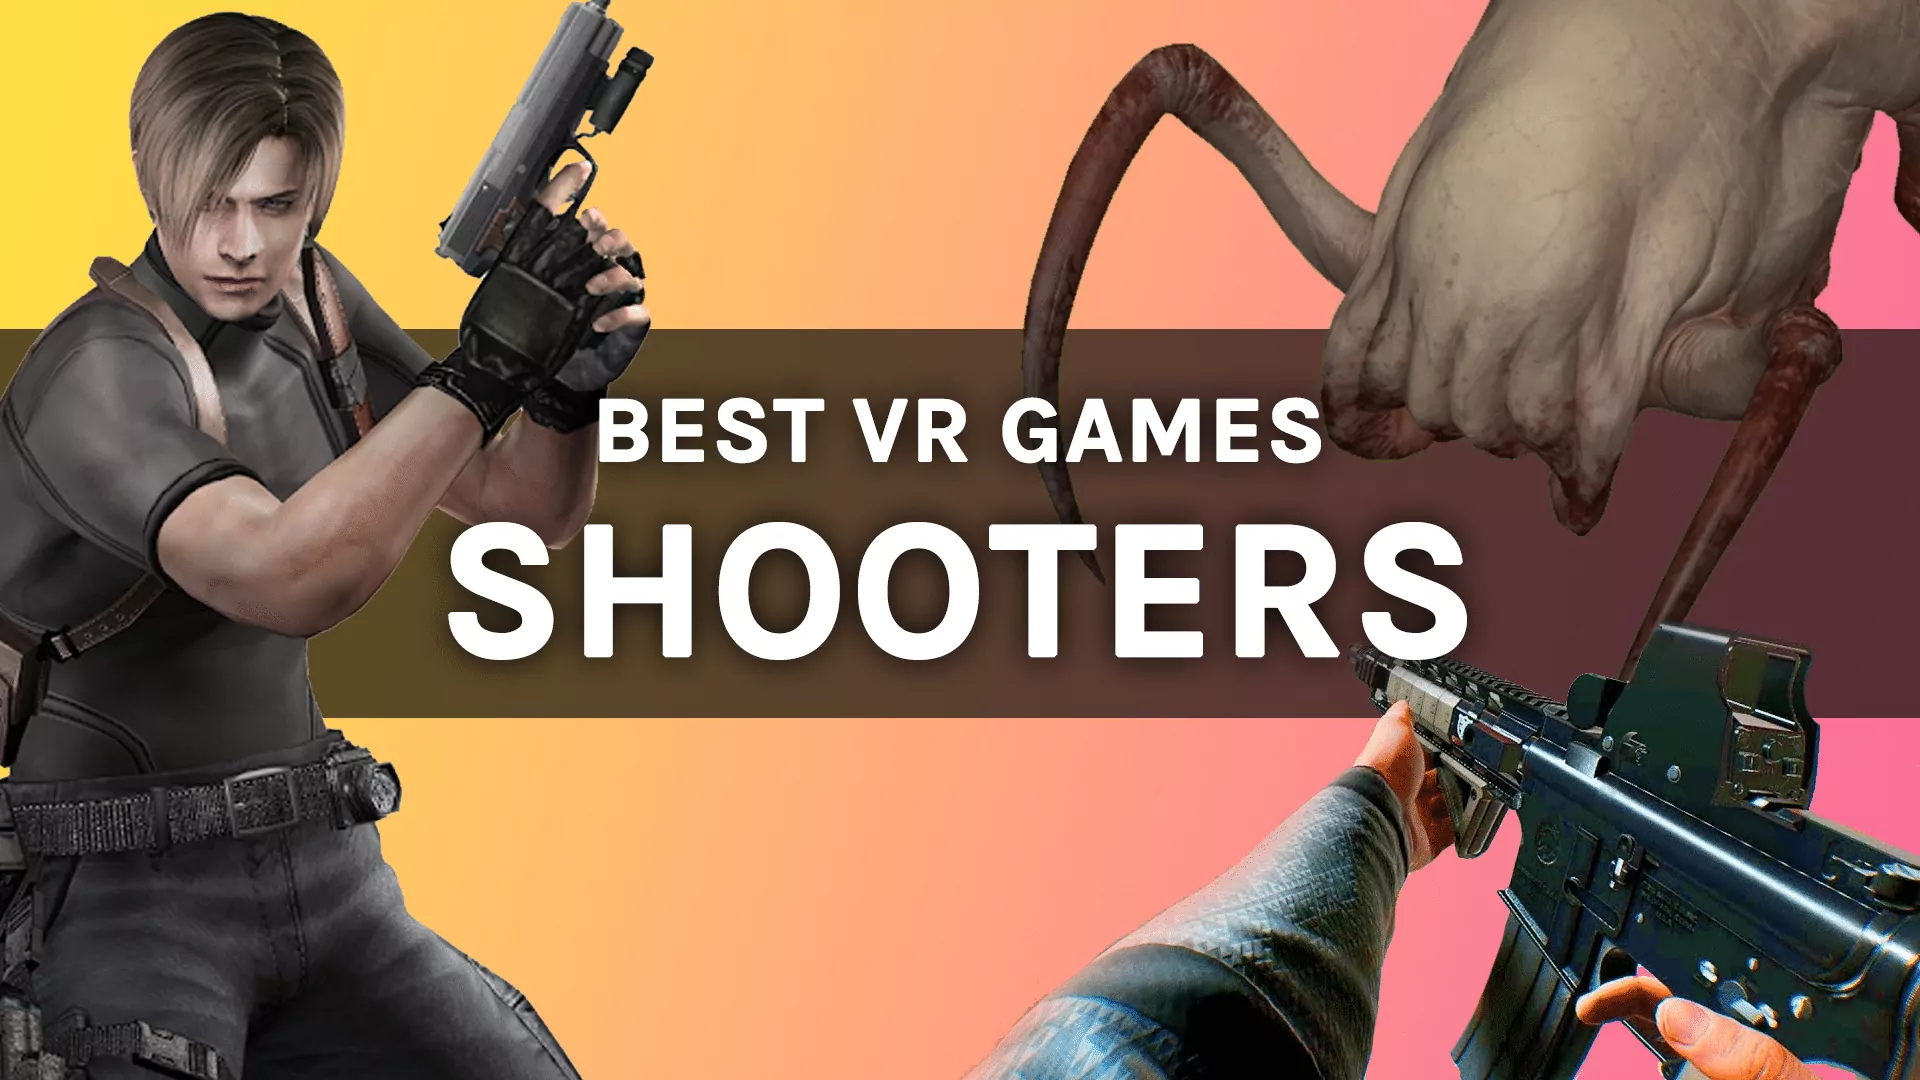 Oculus Quest 2 Shooting Games 2022